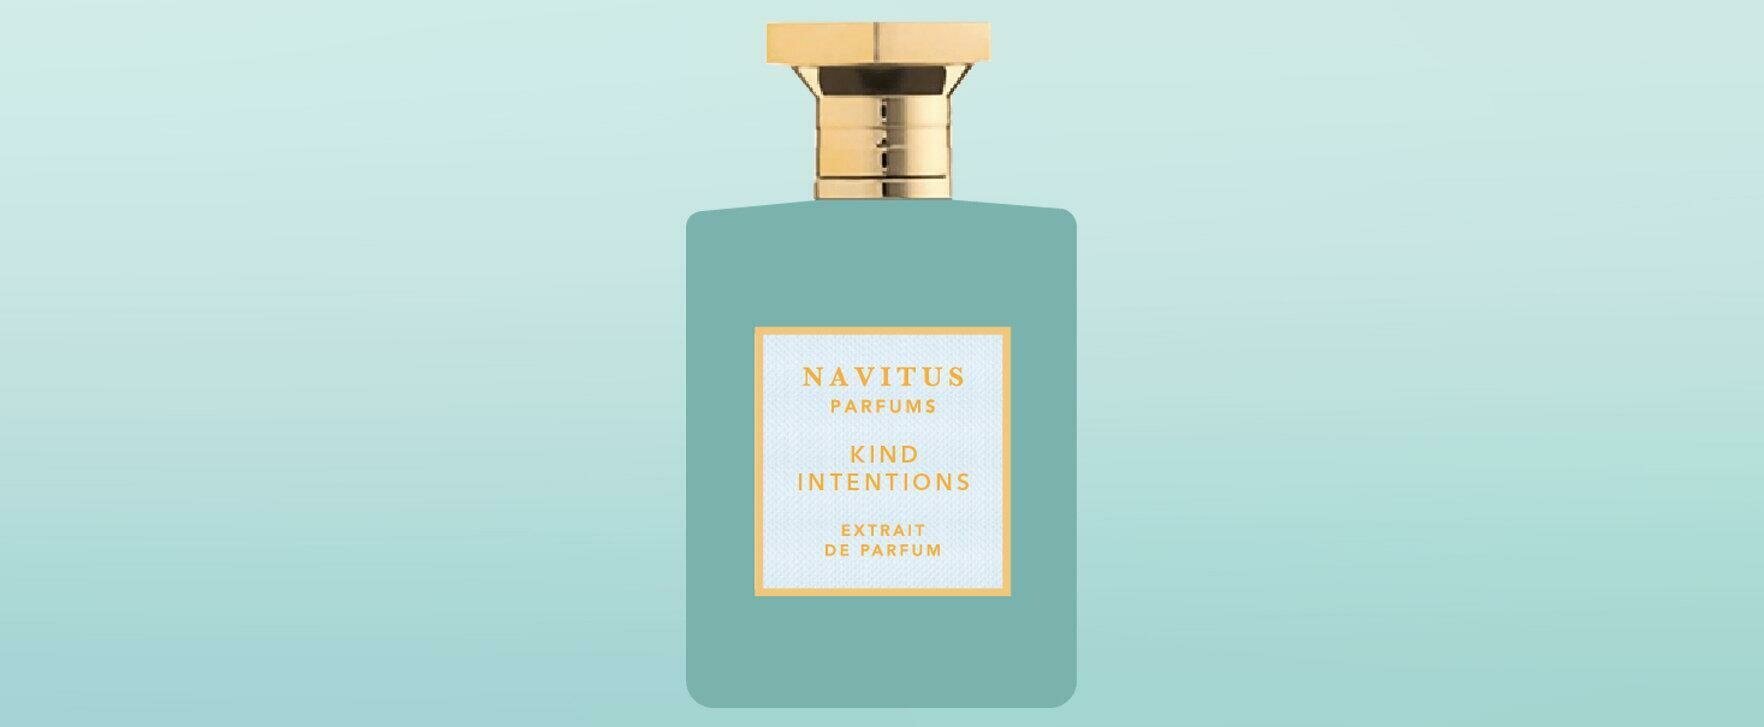 Kind Intentions: The New Fruity Unisex Fragrance From Navitus Parfums